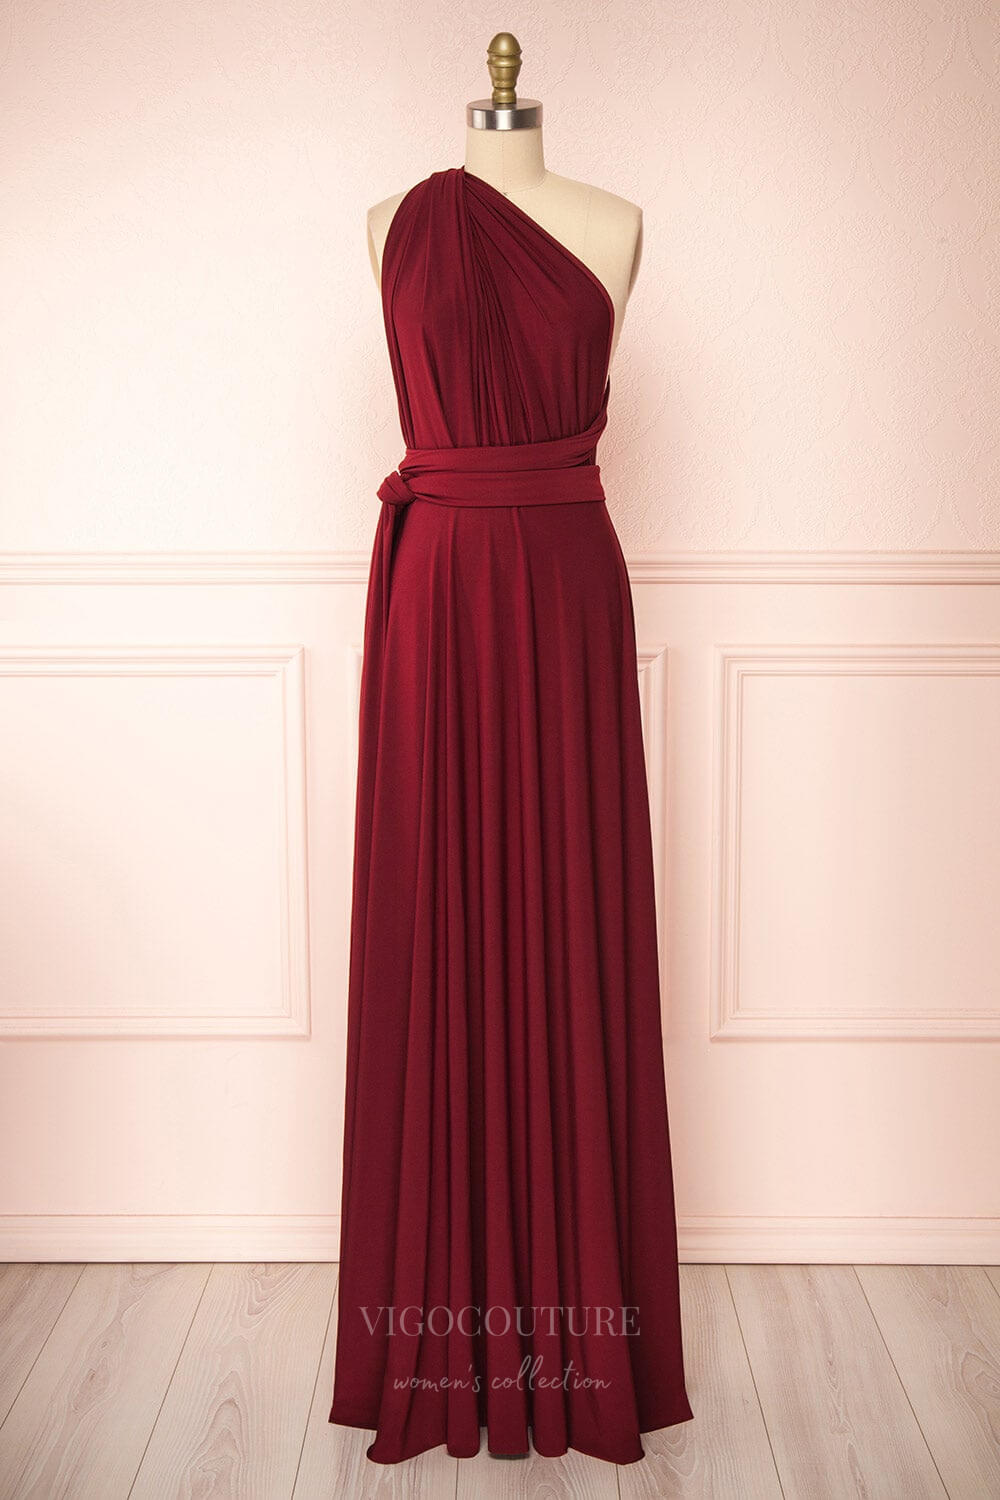 vigocouture-Convertible Bridesmaid Dress Stretchable Woven Dress Pleated Prom Dress Multiway Dress 20860-Prom Dresses-vigocouture-Burgundy-US2-